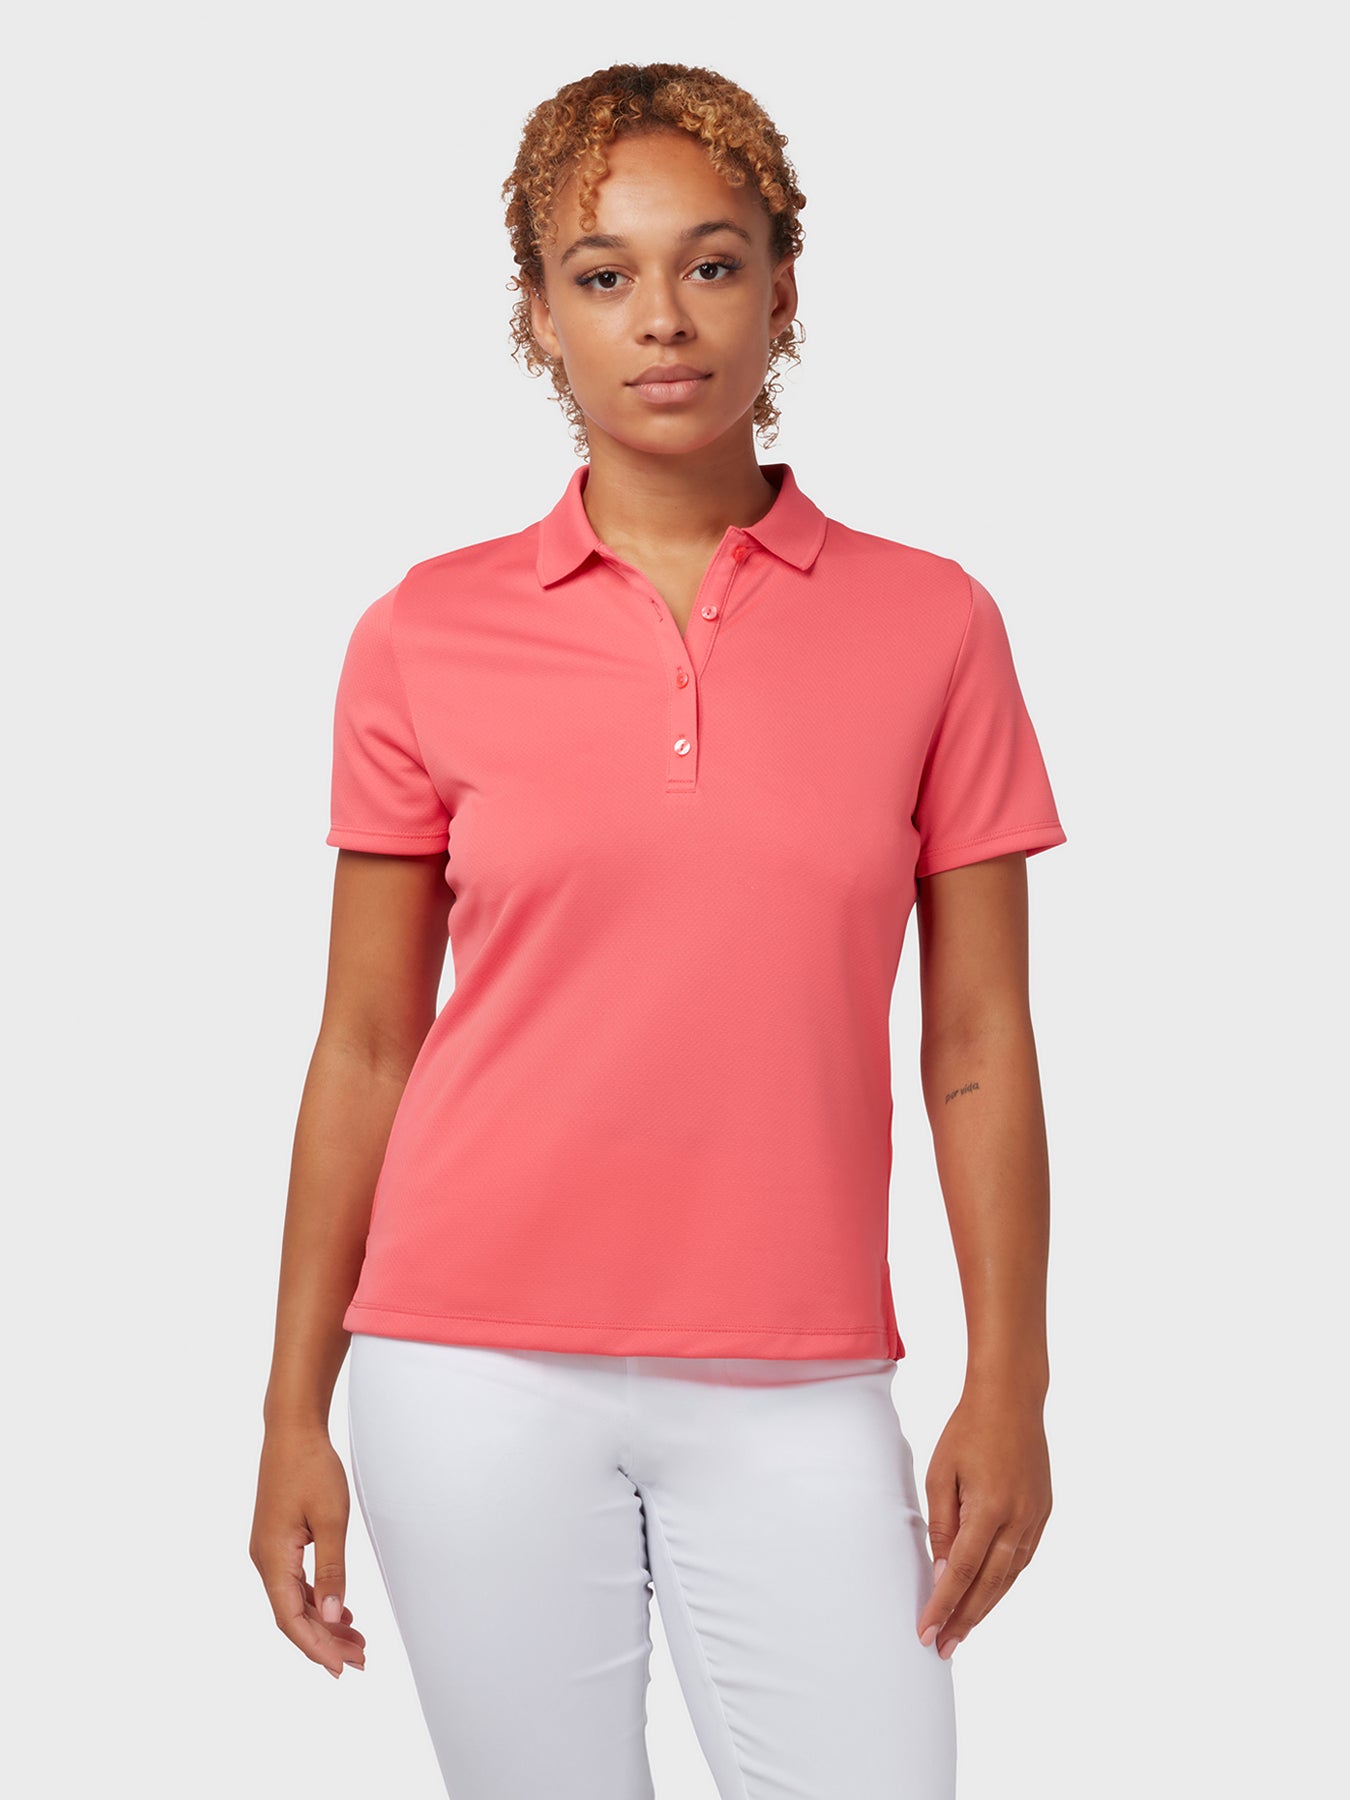 View Swing Tech Womens Polo In Coral Paradise Coral Paradise L information